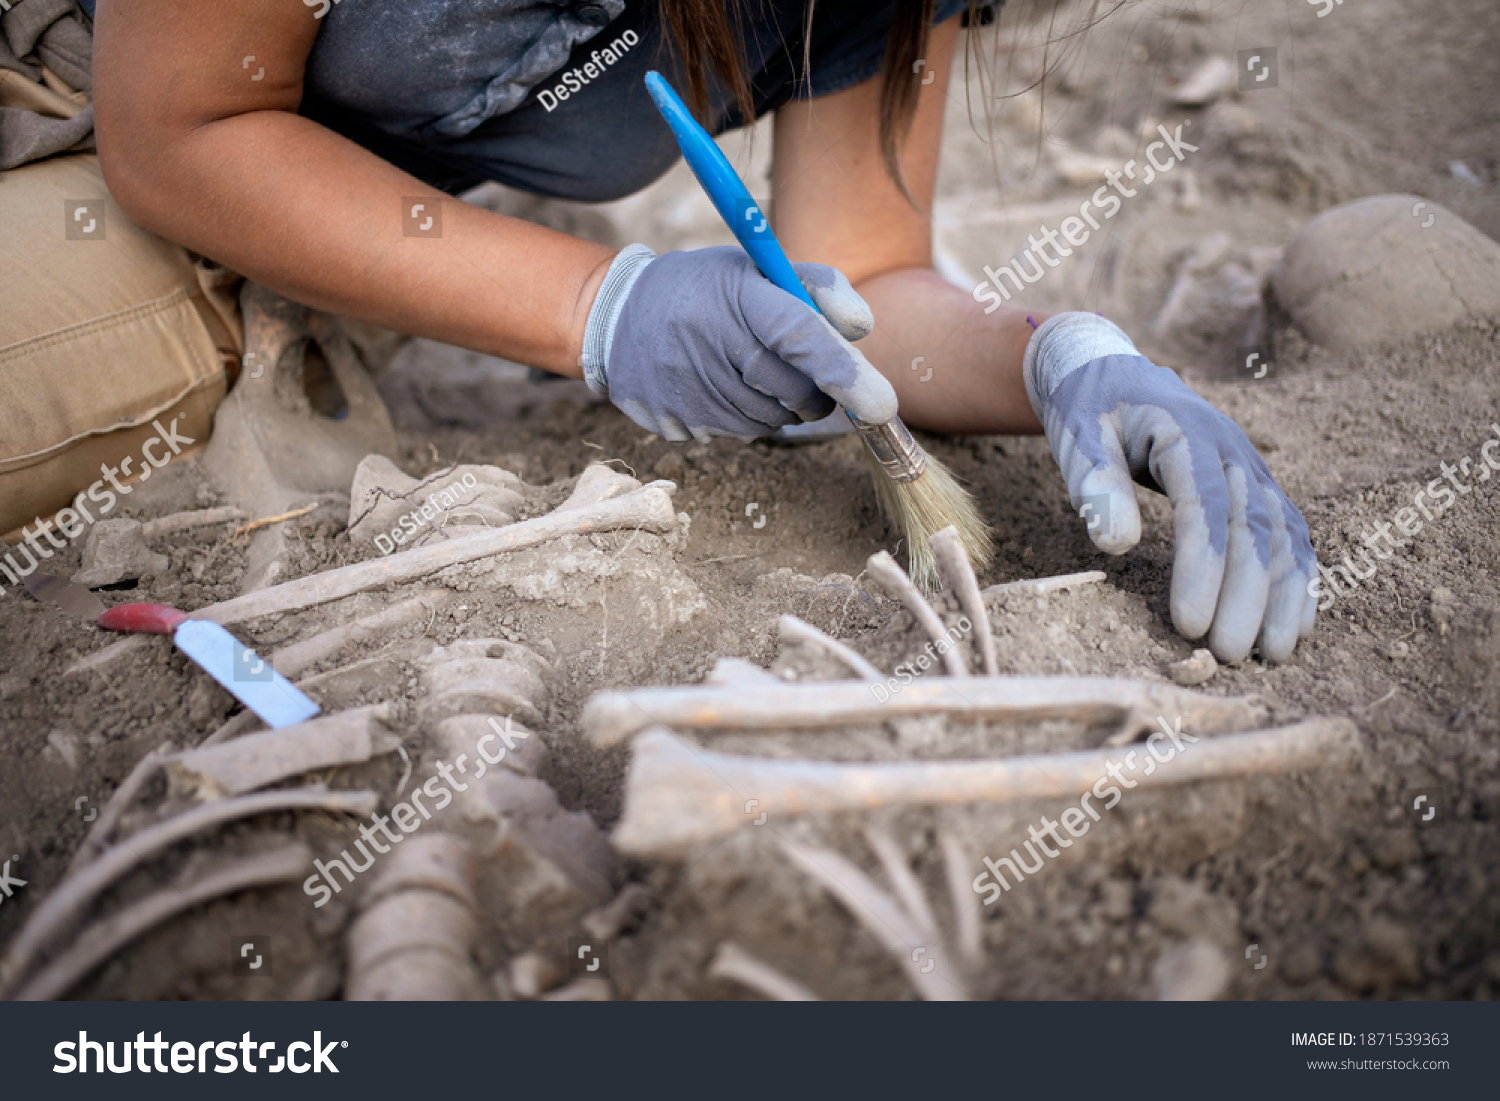 Young woman archaeologist working on human remains excavation #1871539363